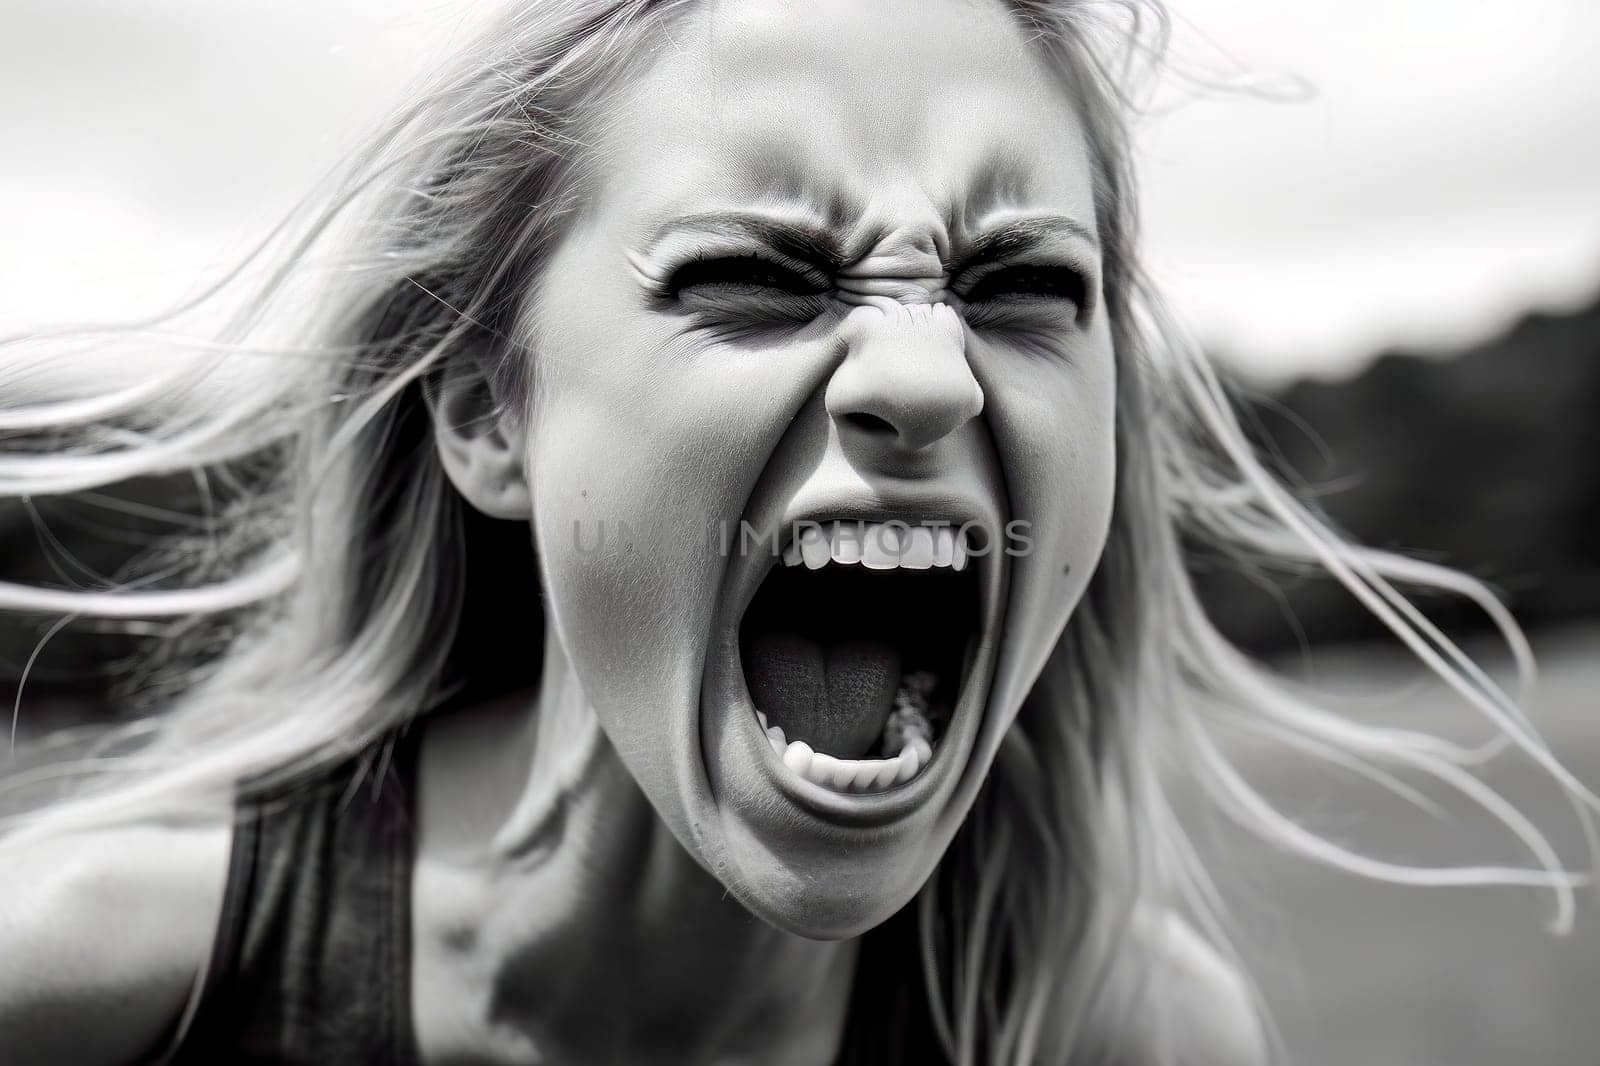 Exhausted Girl's Symbol of Burnout: Girl Screaming in Anger by pippocarlot